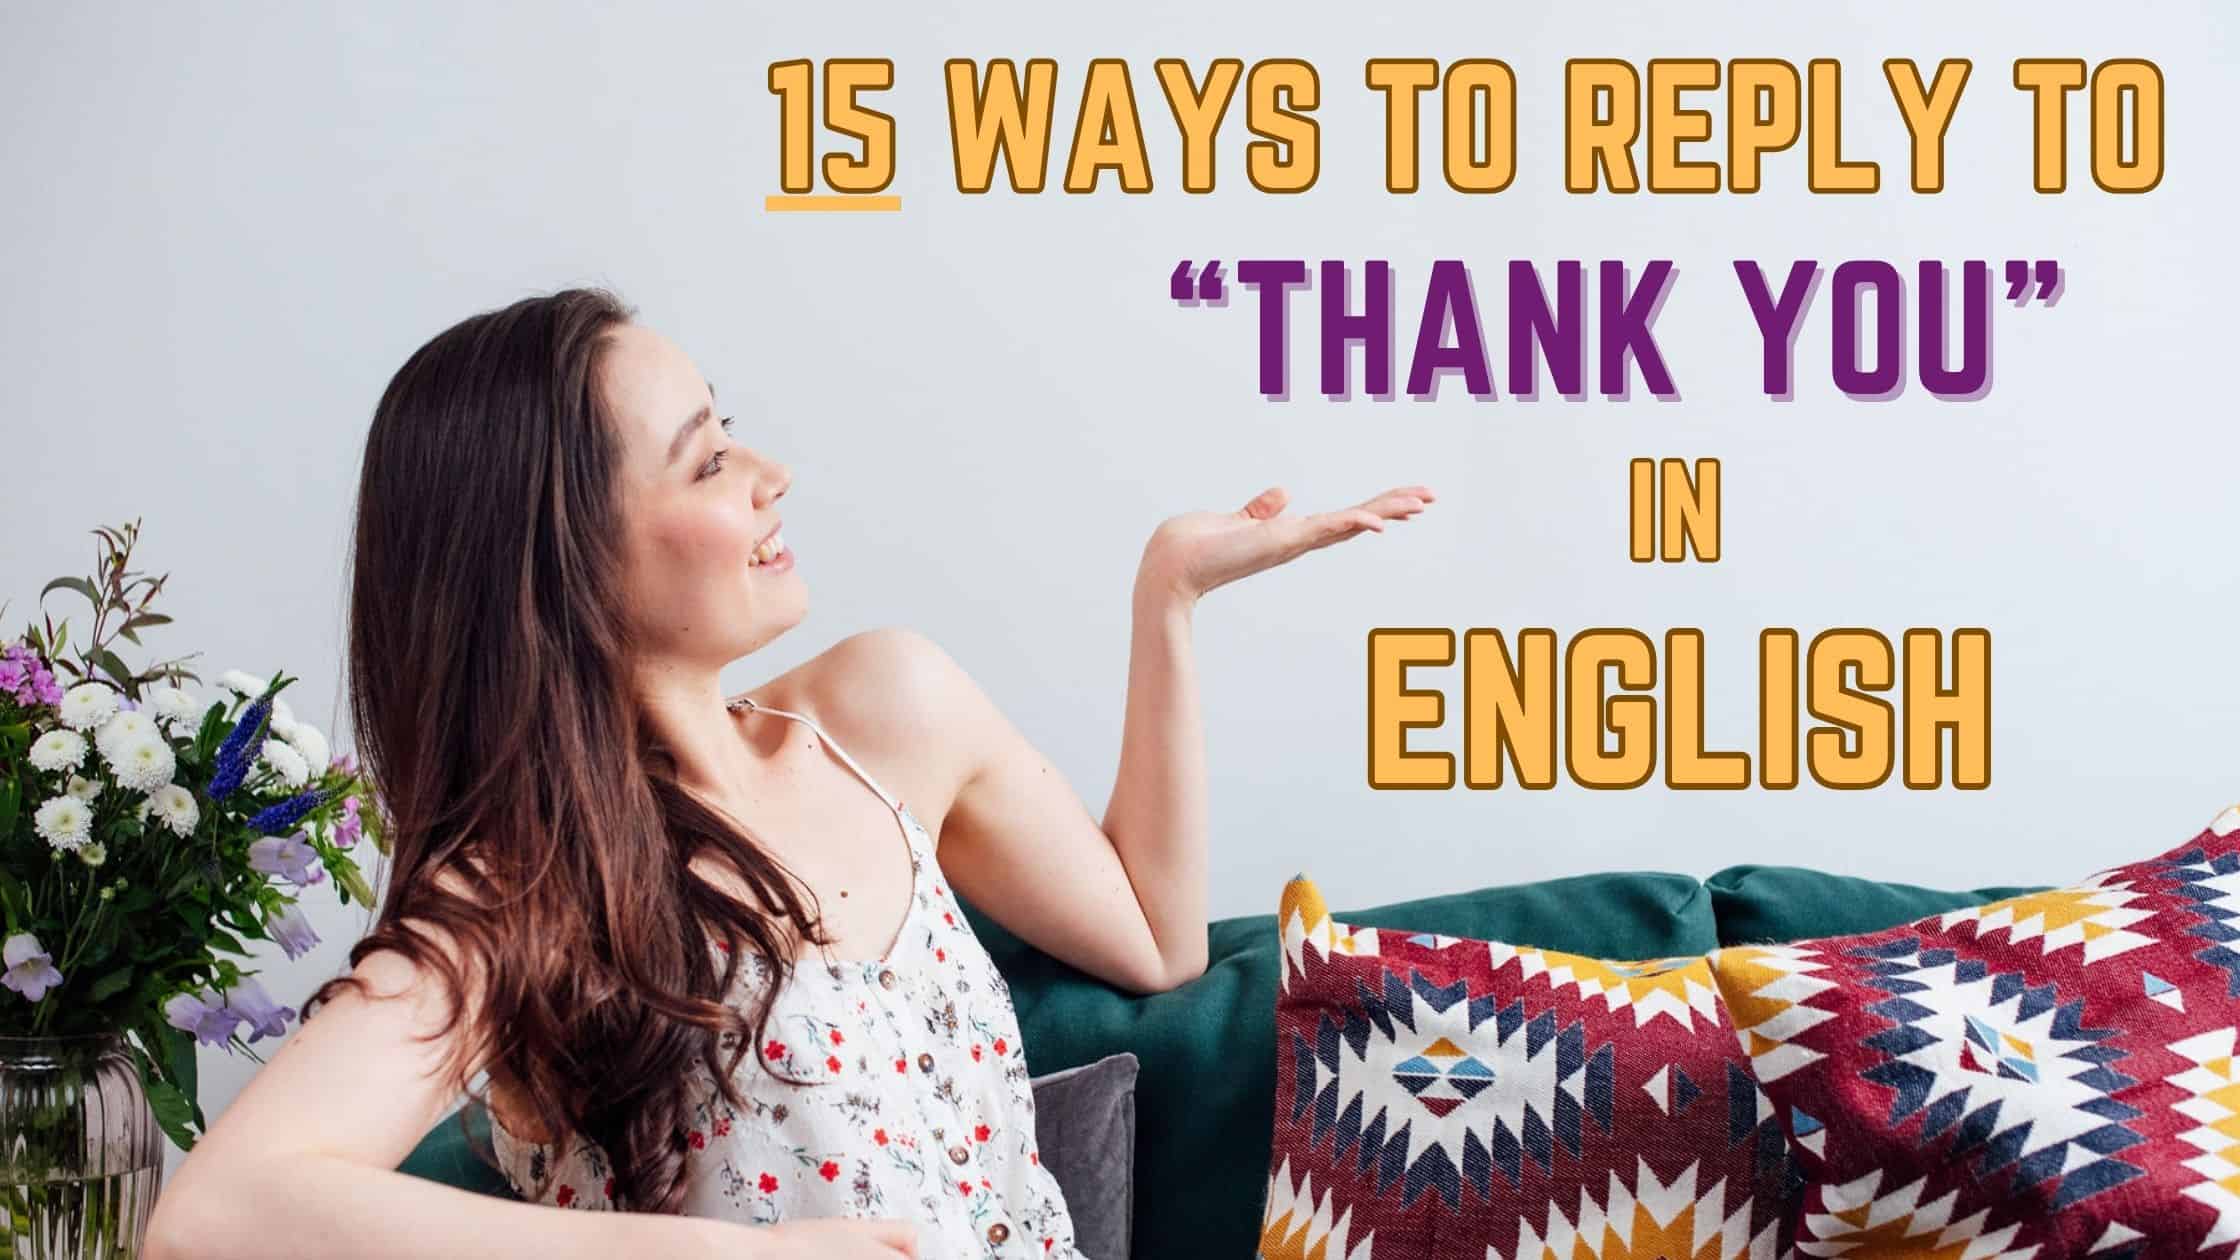 15 Ways to Reply to “Thank You” in English